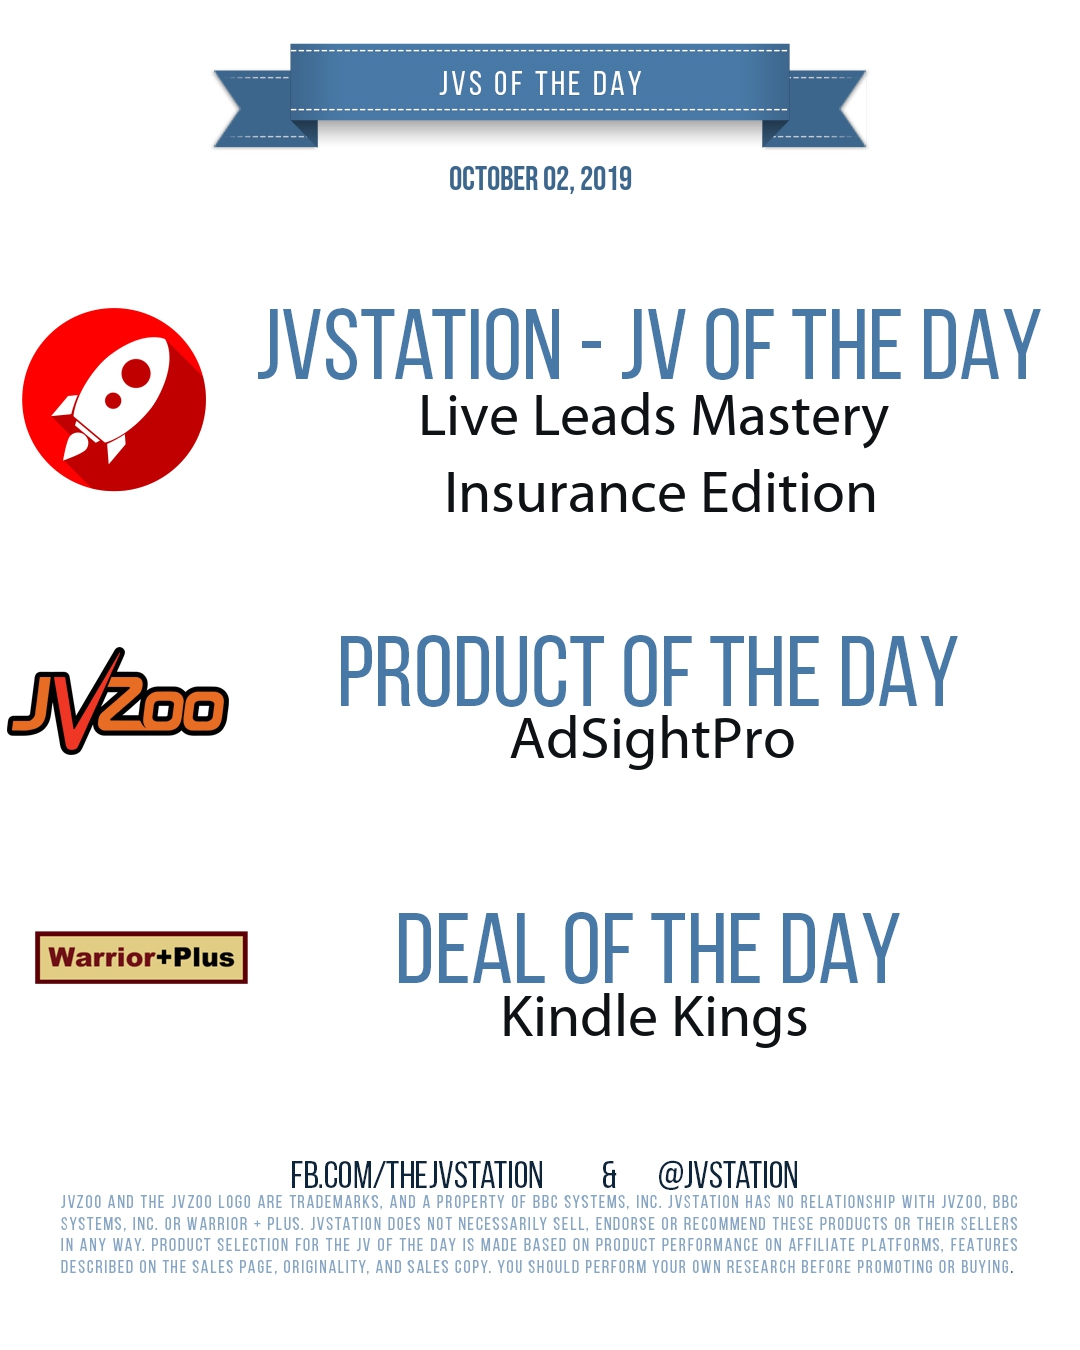 JVs of the day - October 02, 2019